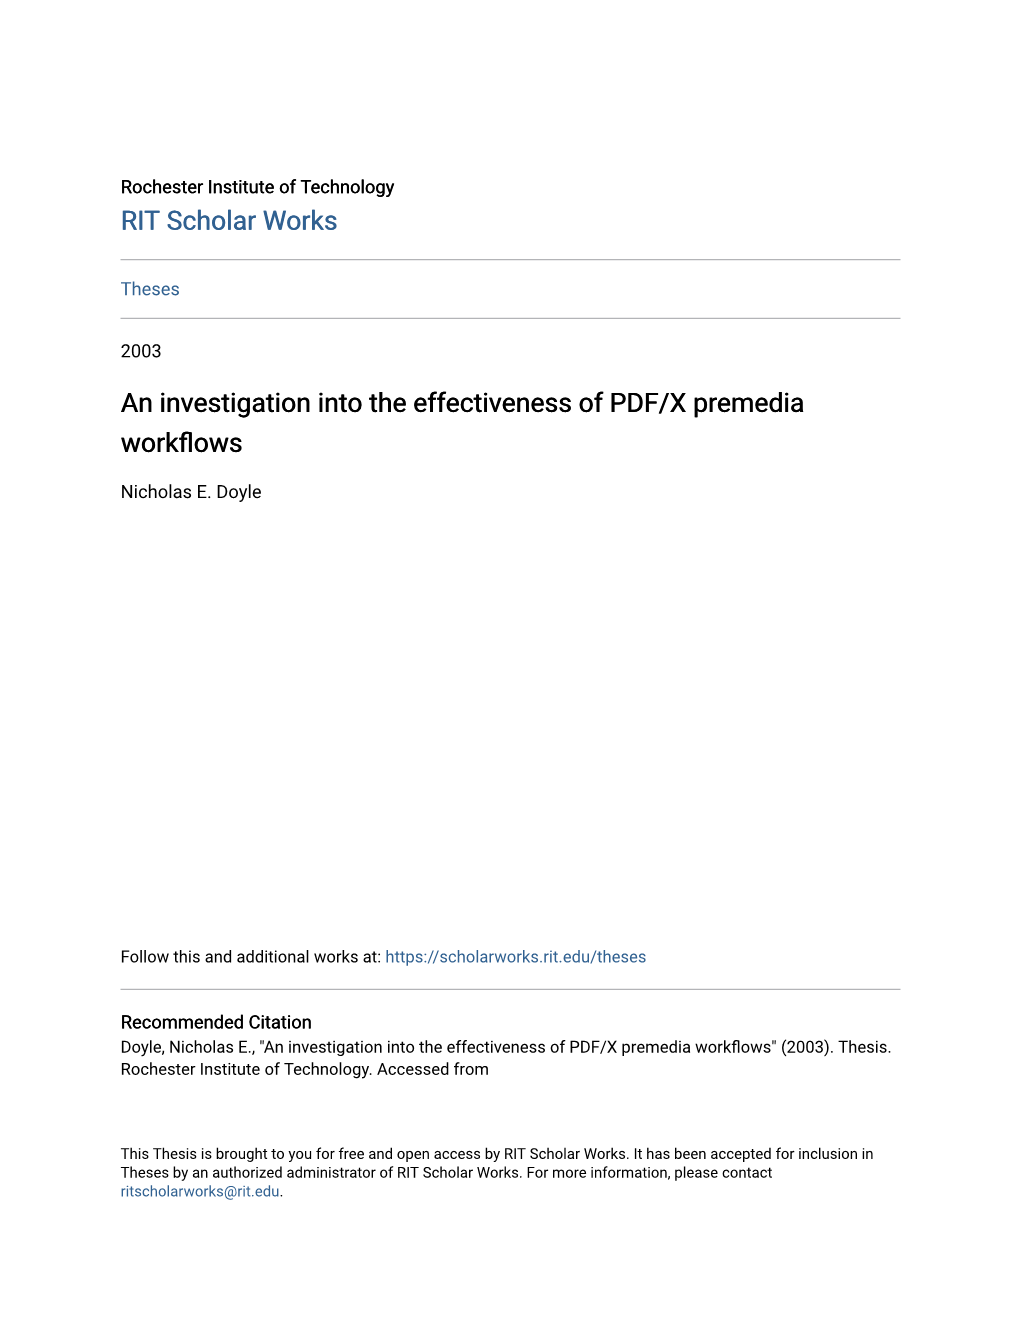 An Investigation Into the Effectiveness of PDF/X Premedia Workflows